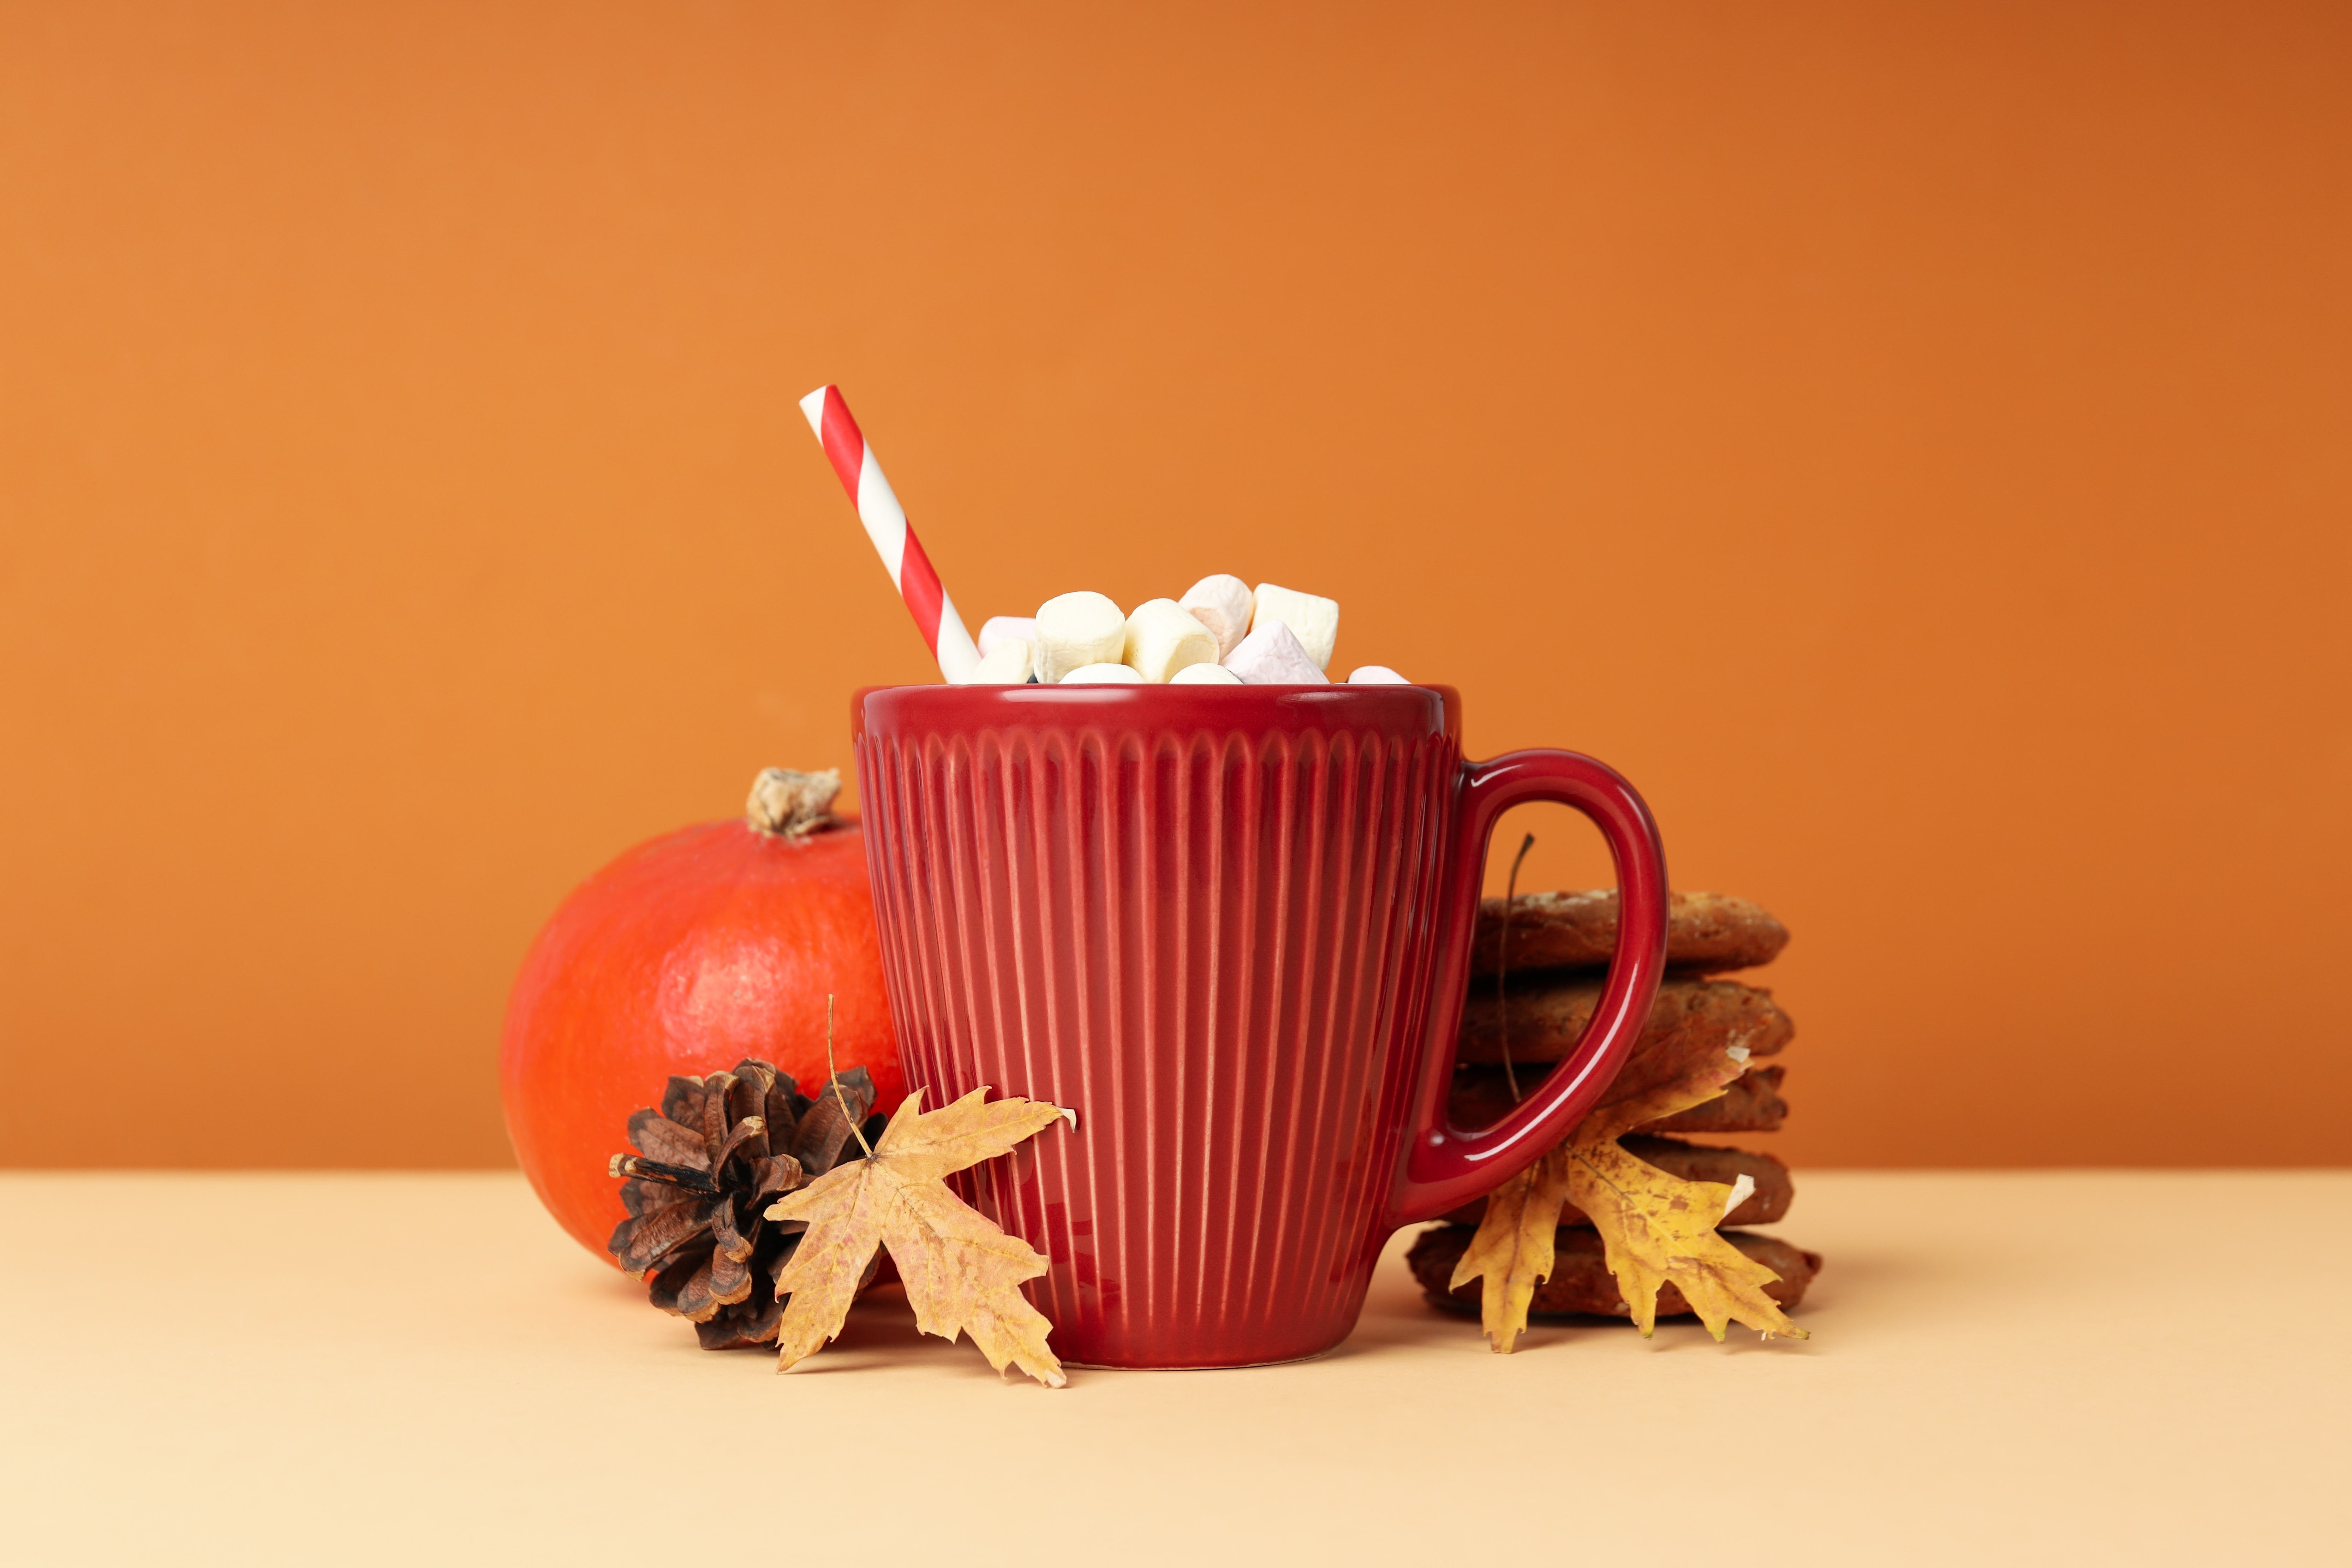 A delicious mug of hot chocolate to enjoy during the holiday season